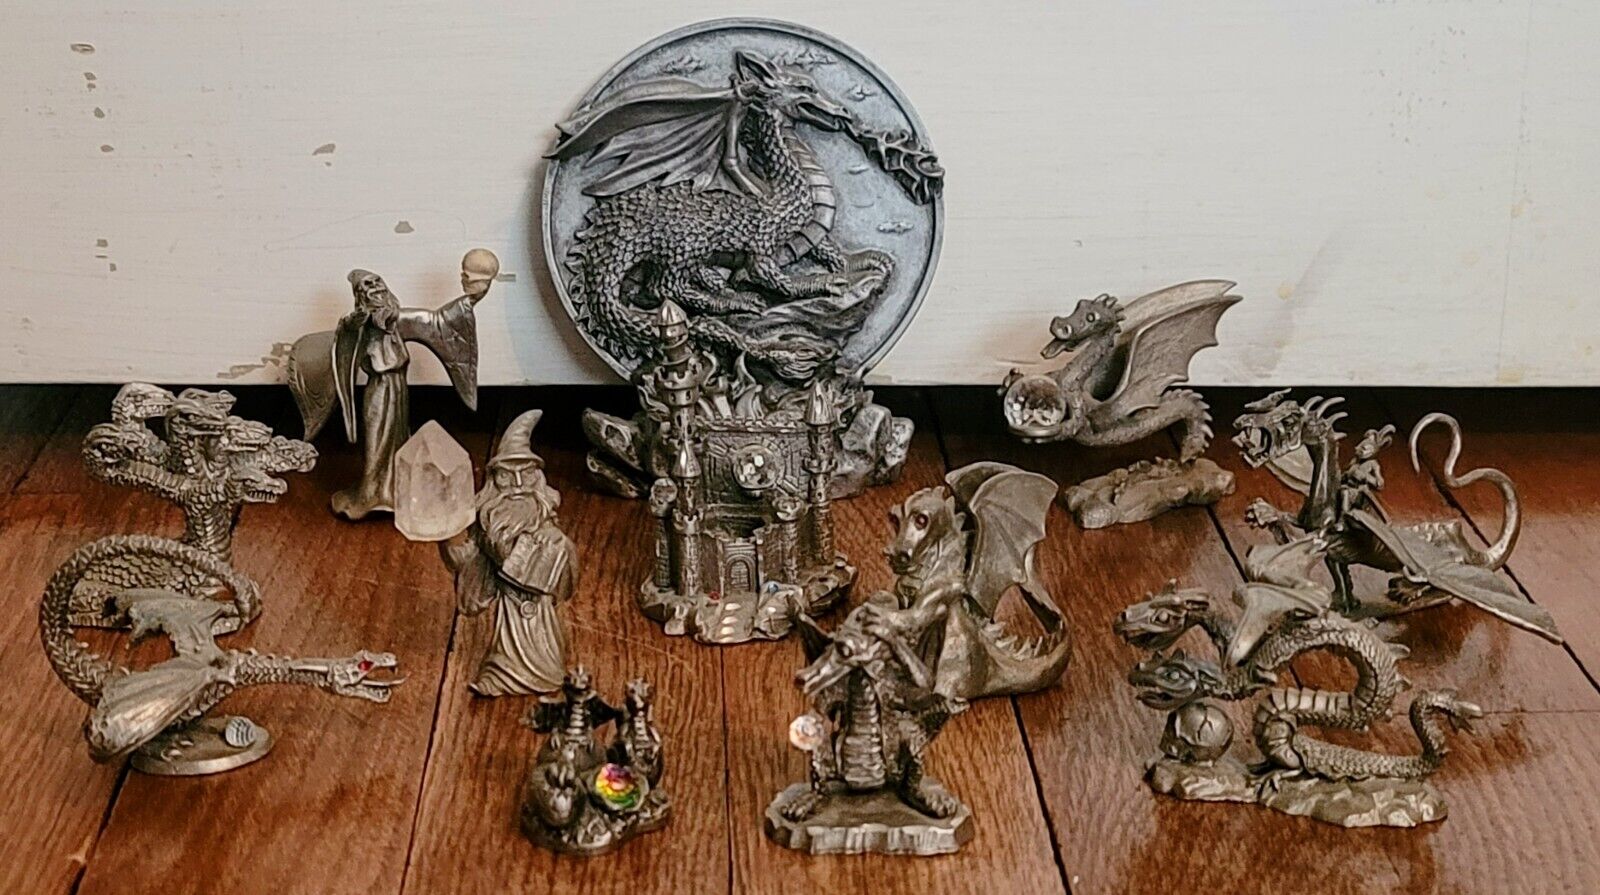 LOT OF 12 PEWTER FANTASY DRAGONS & WIZARDS. SPOONTIQUES HUDSON PARTHA RAWCLIFFE